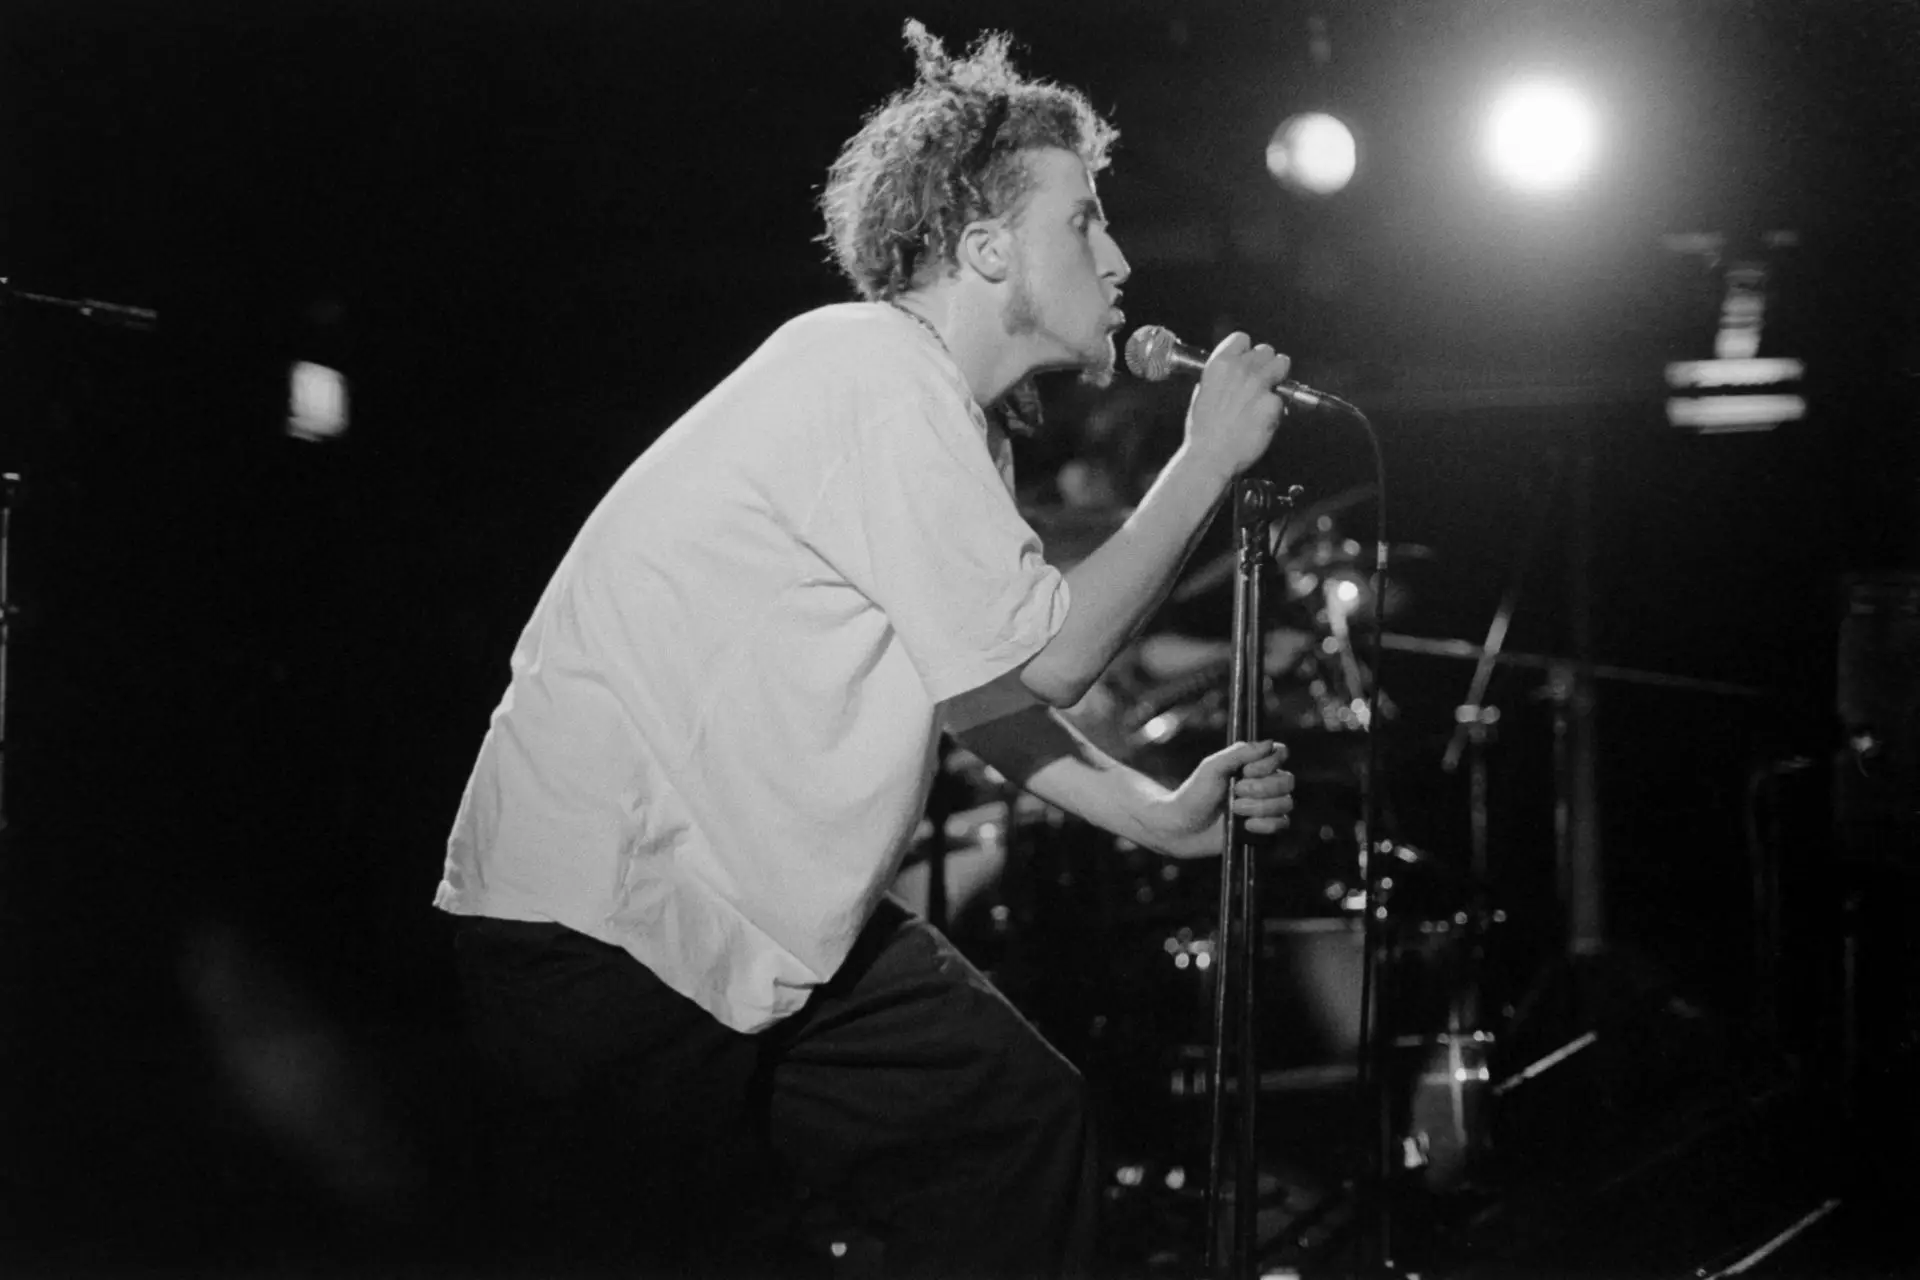 black and white image of a man singing